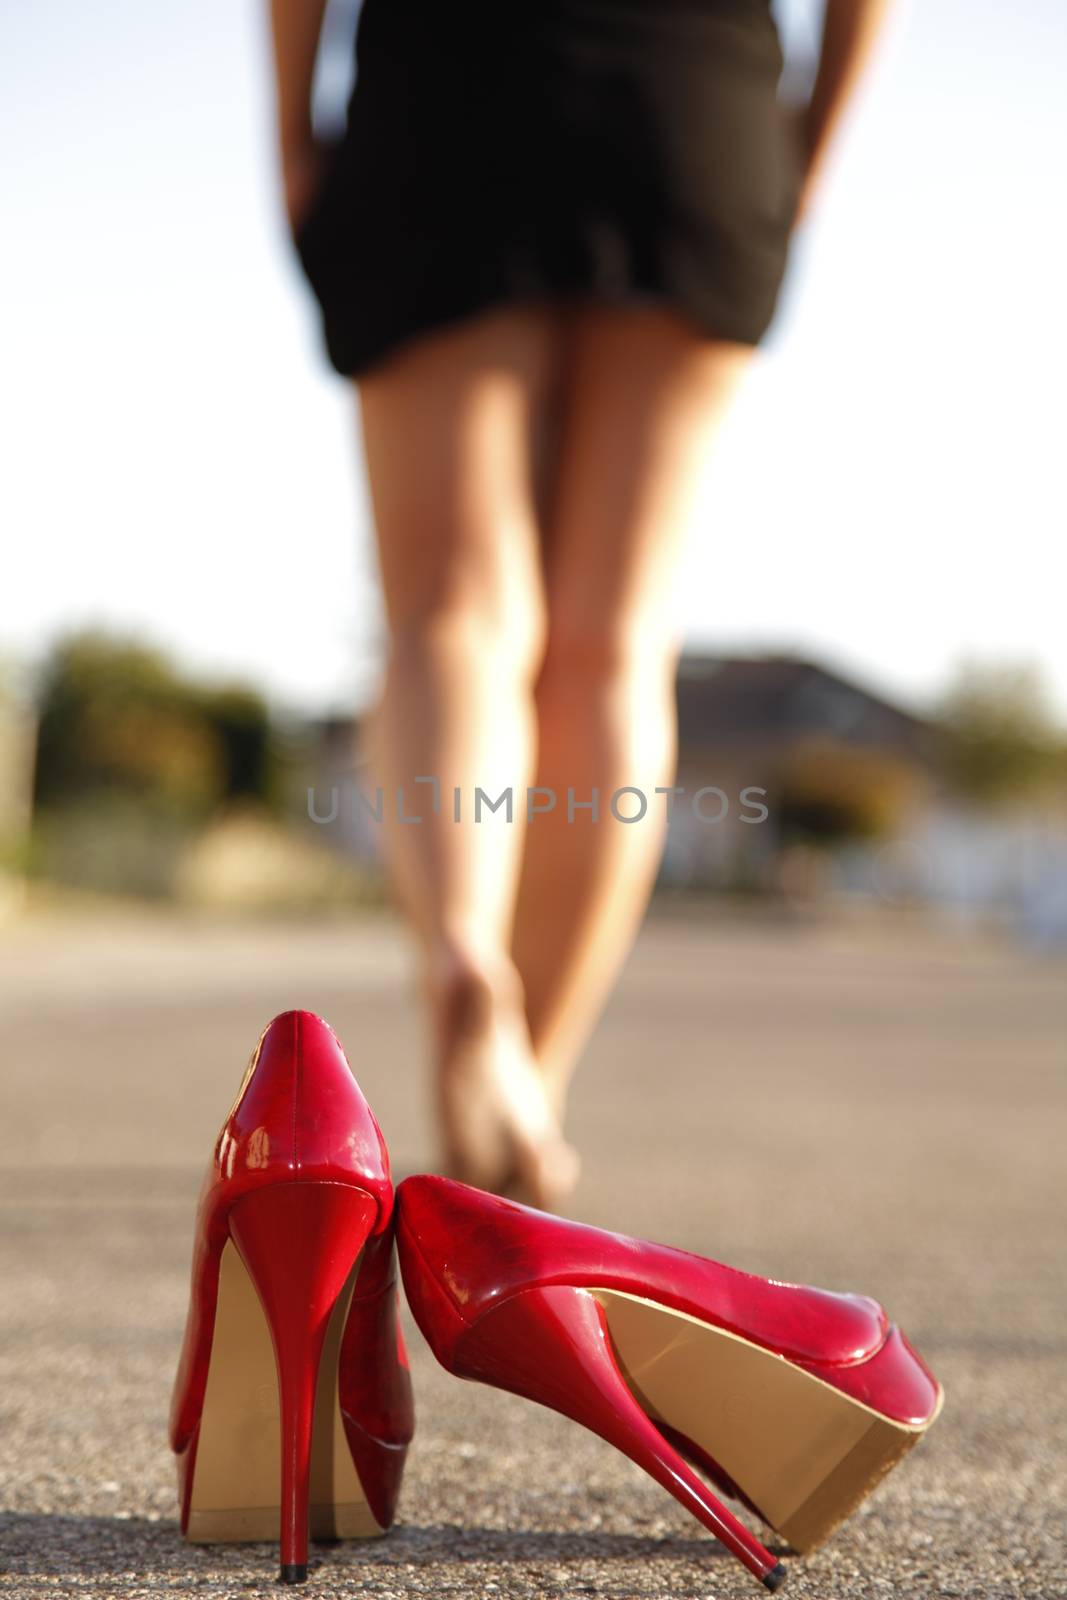 Red high heels standing on the street an a woman goes away barefoot